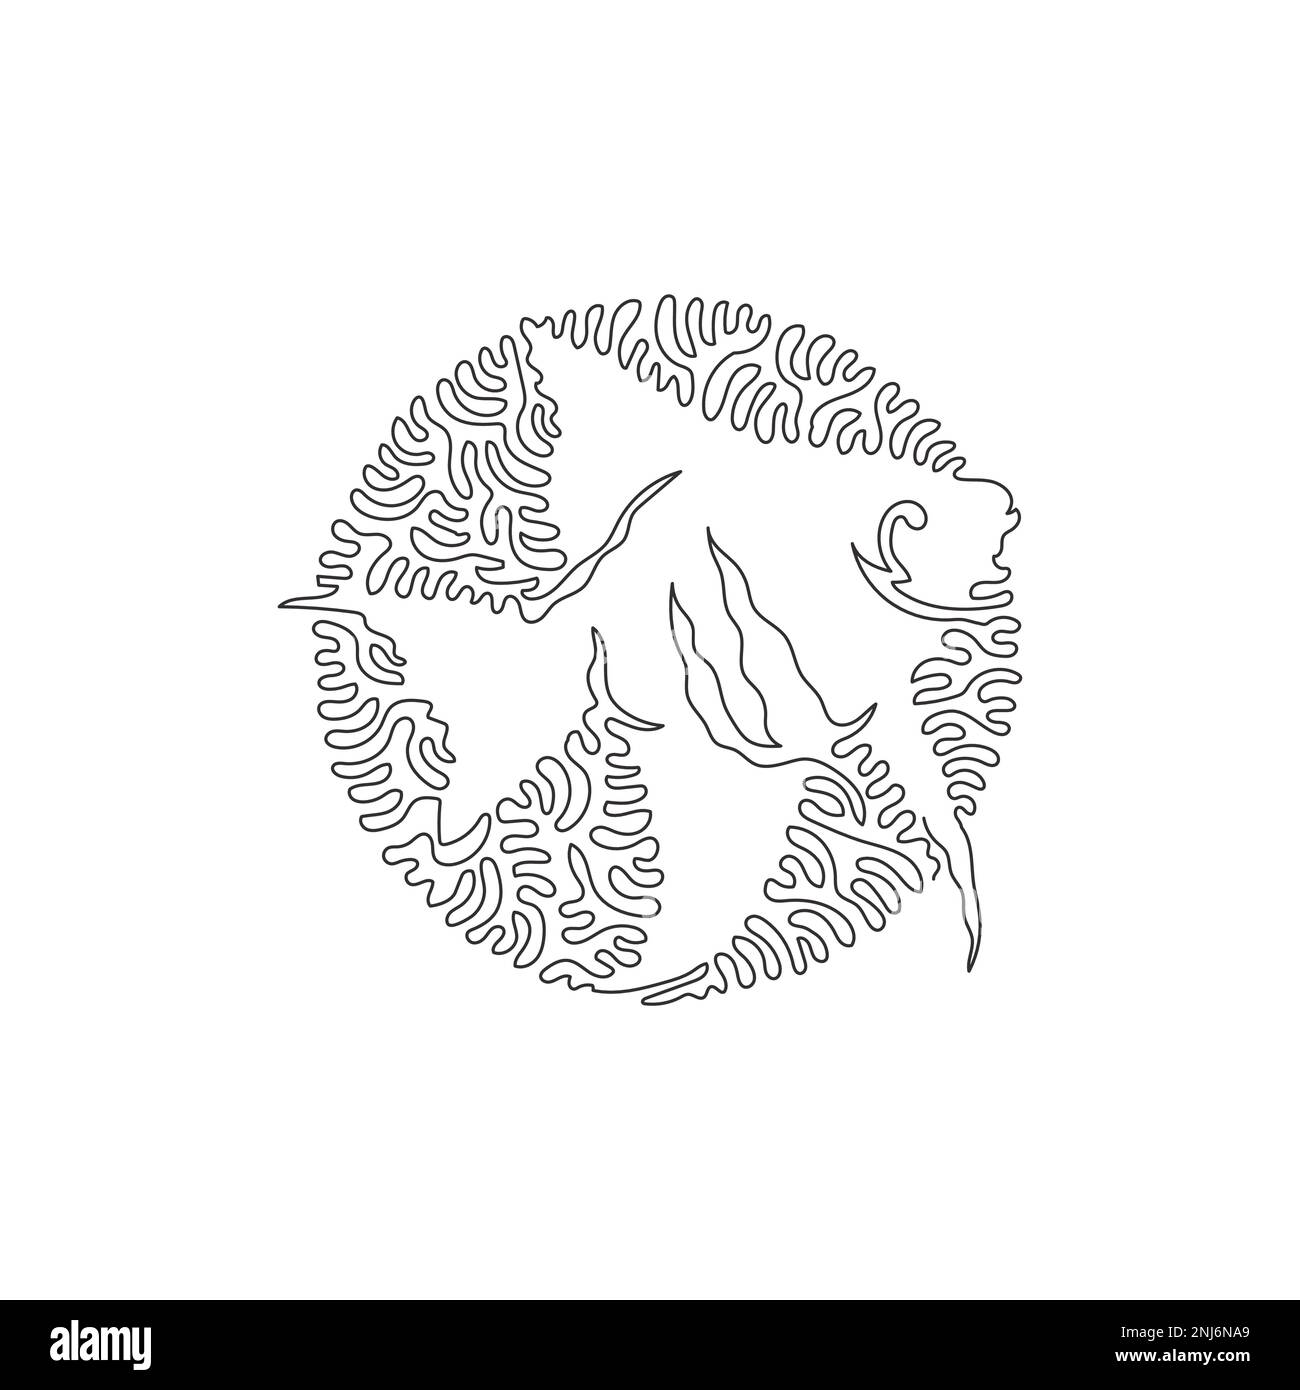 Single one curly line drawing of beautiful fish abstract art. Continuous line drawing design vector illustration of angelfish fins like wings Stock Vector